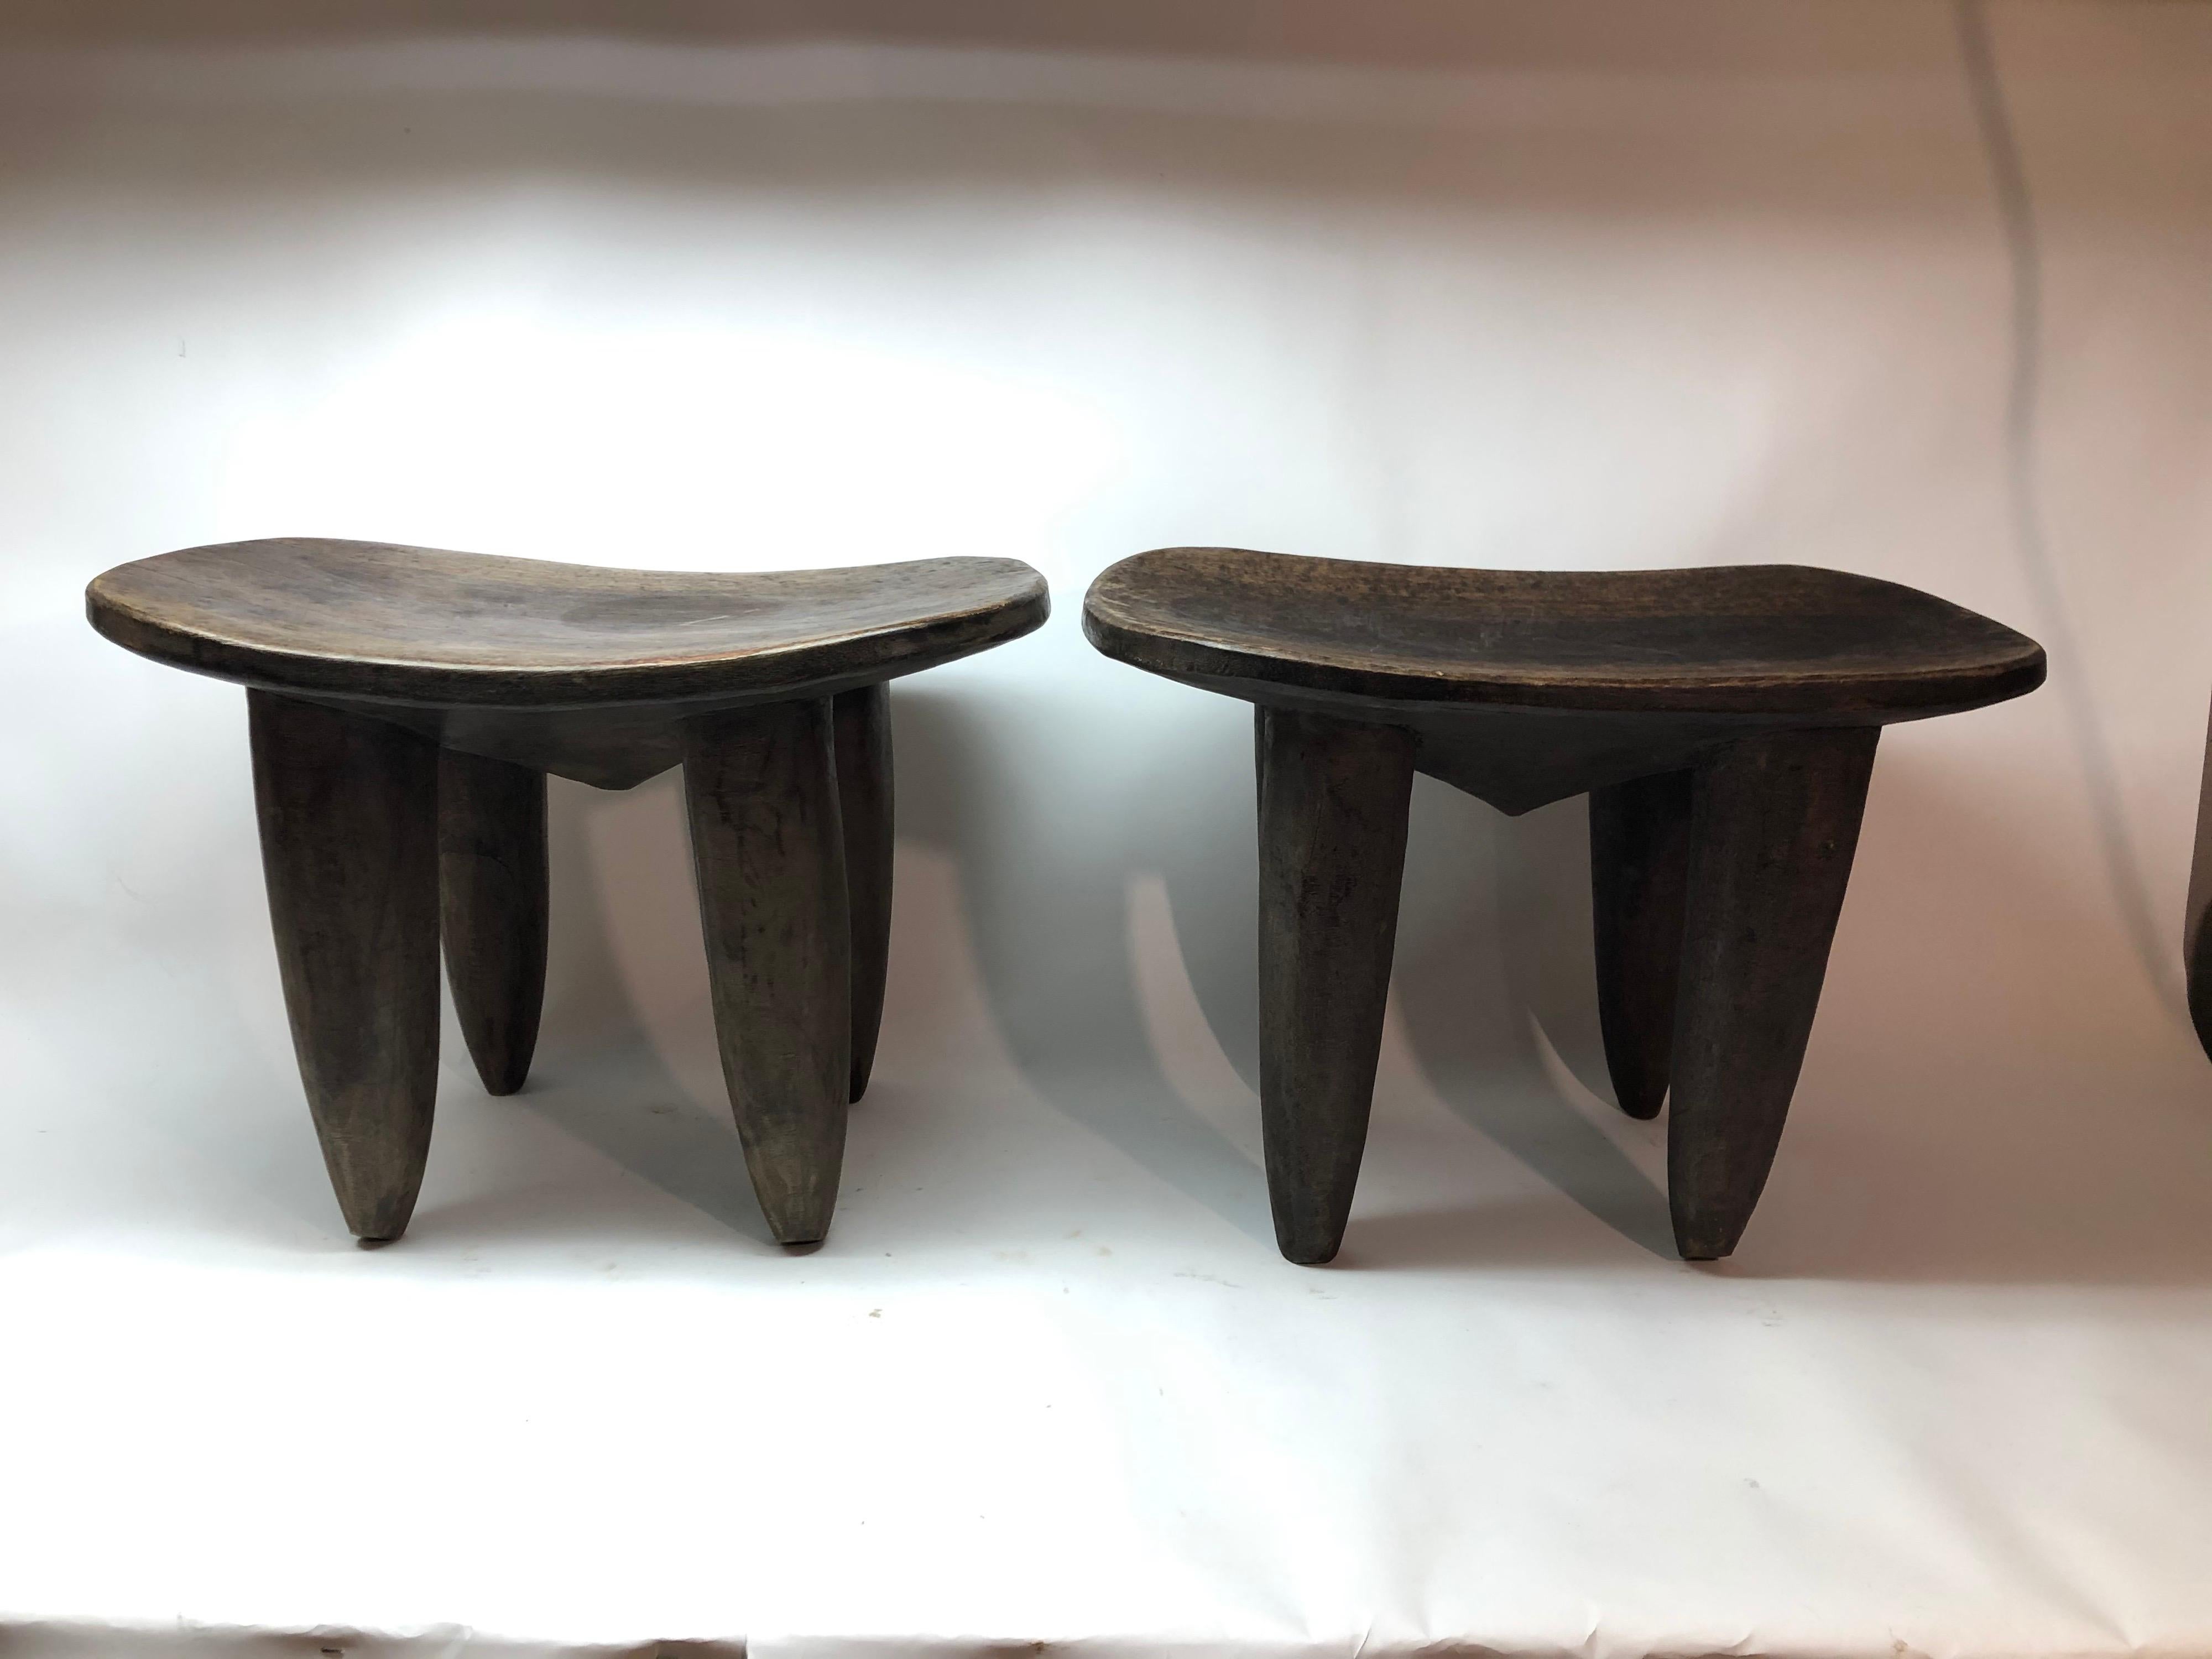 African accent tables from Cote d'Ivoire. Sold together or separately. 1400.00 each. They also make great side and occasional tables.